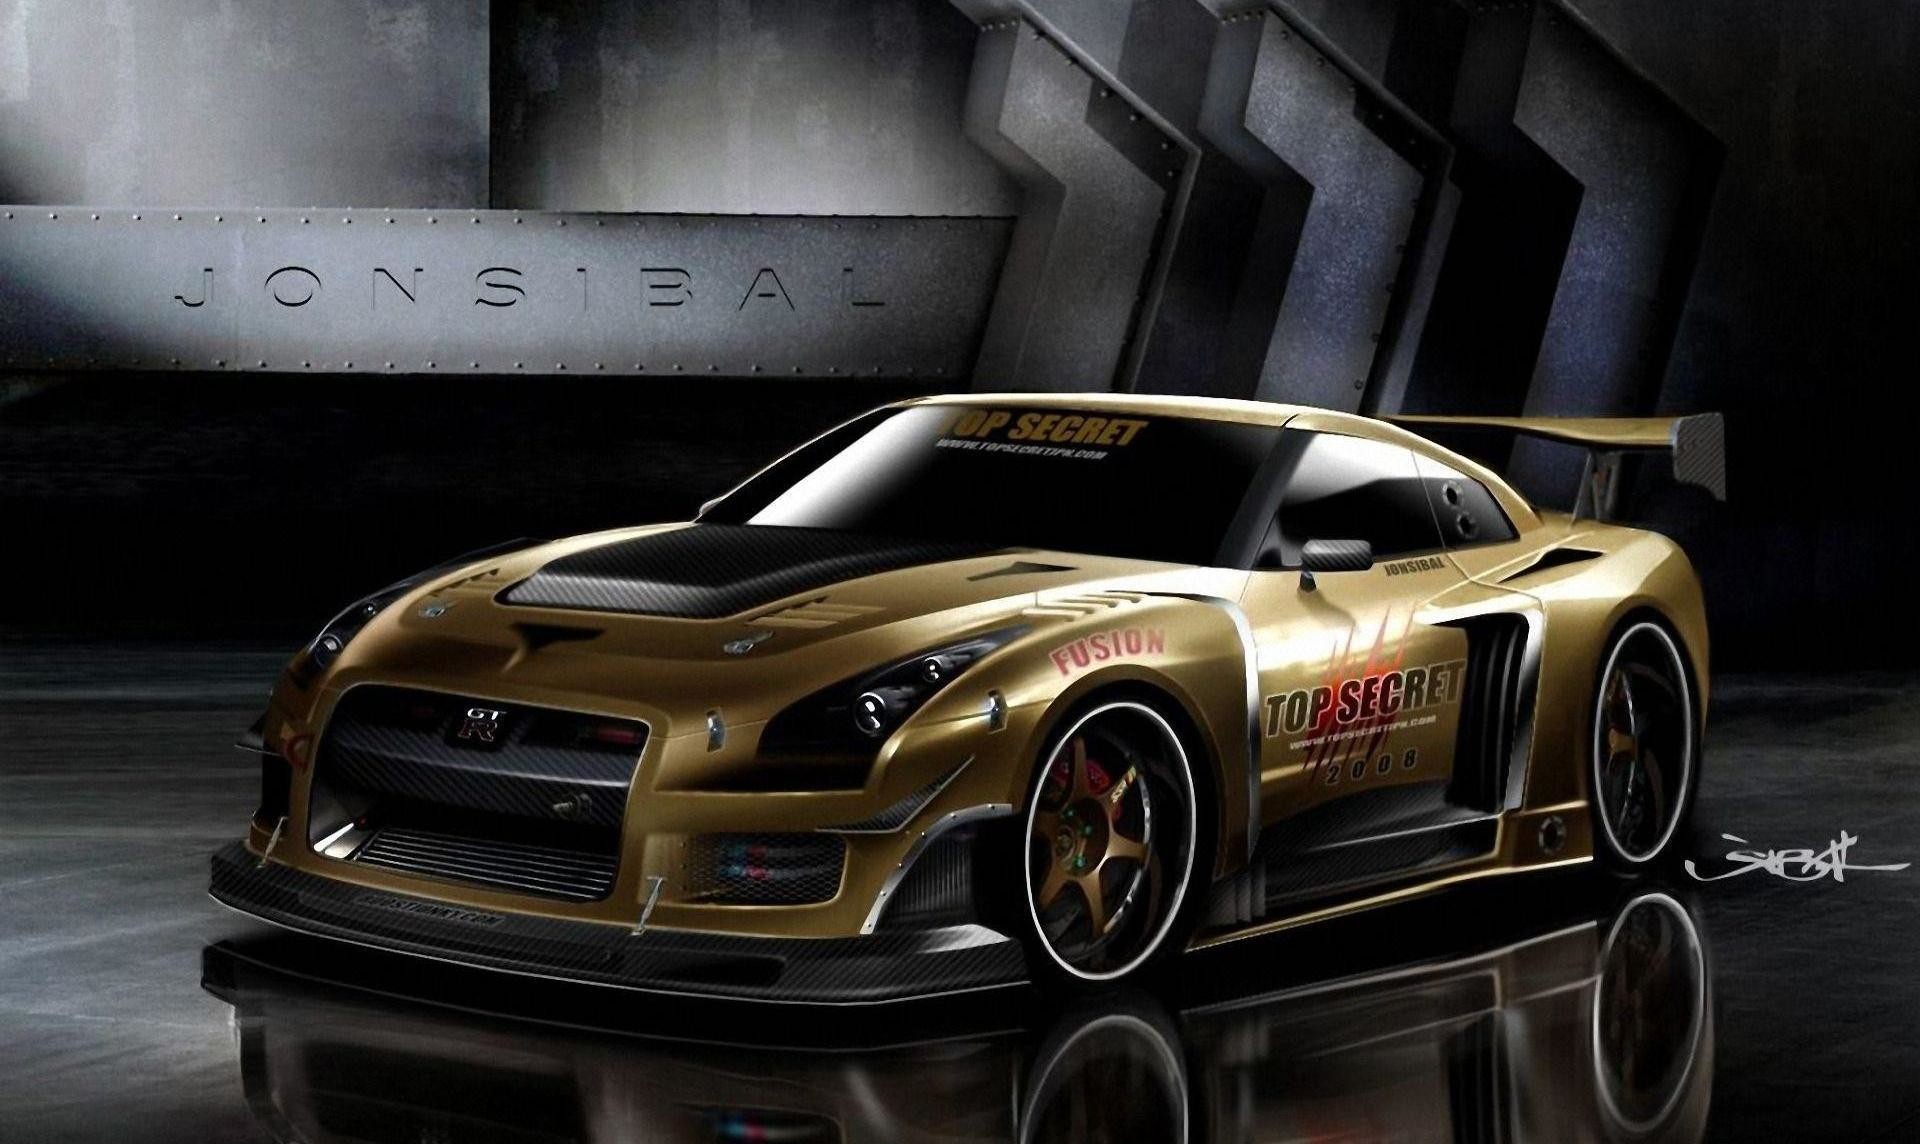 1920x1144 Related Wallpapers. Top Secret Fusion 2010 Nissan Gtr